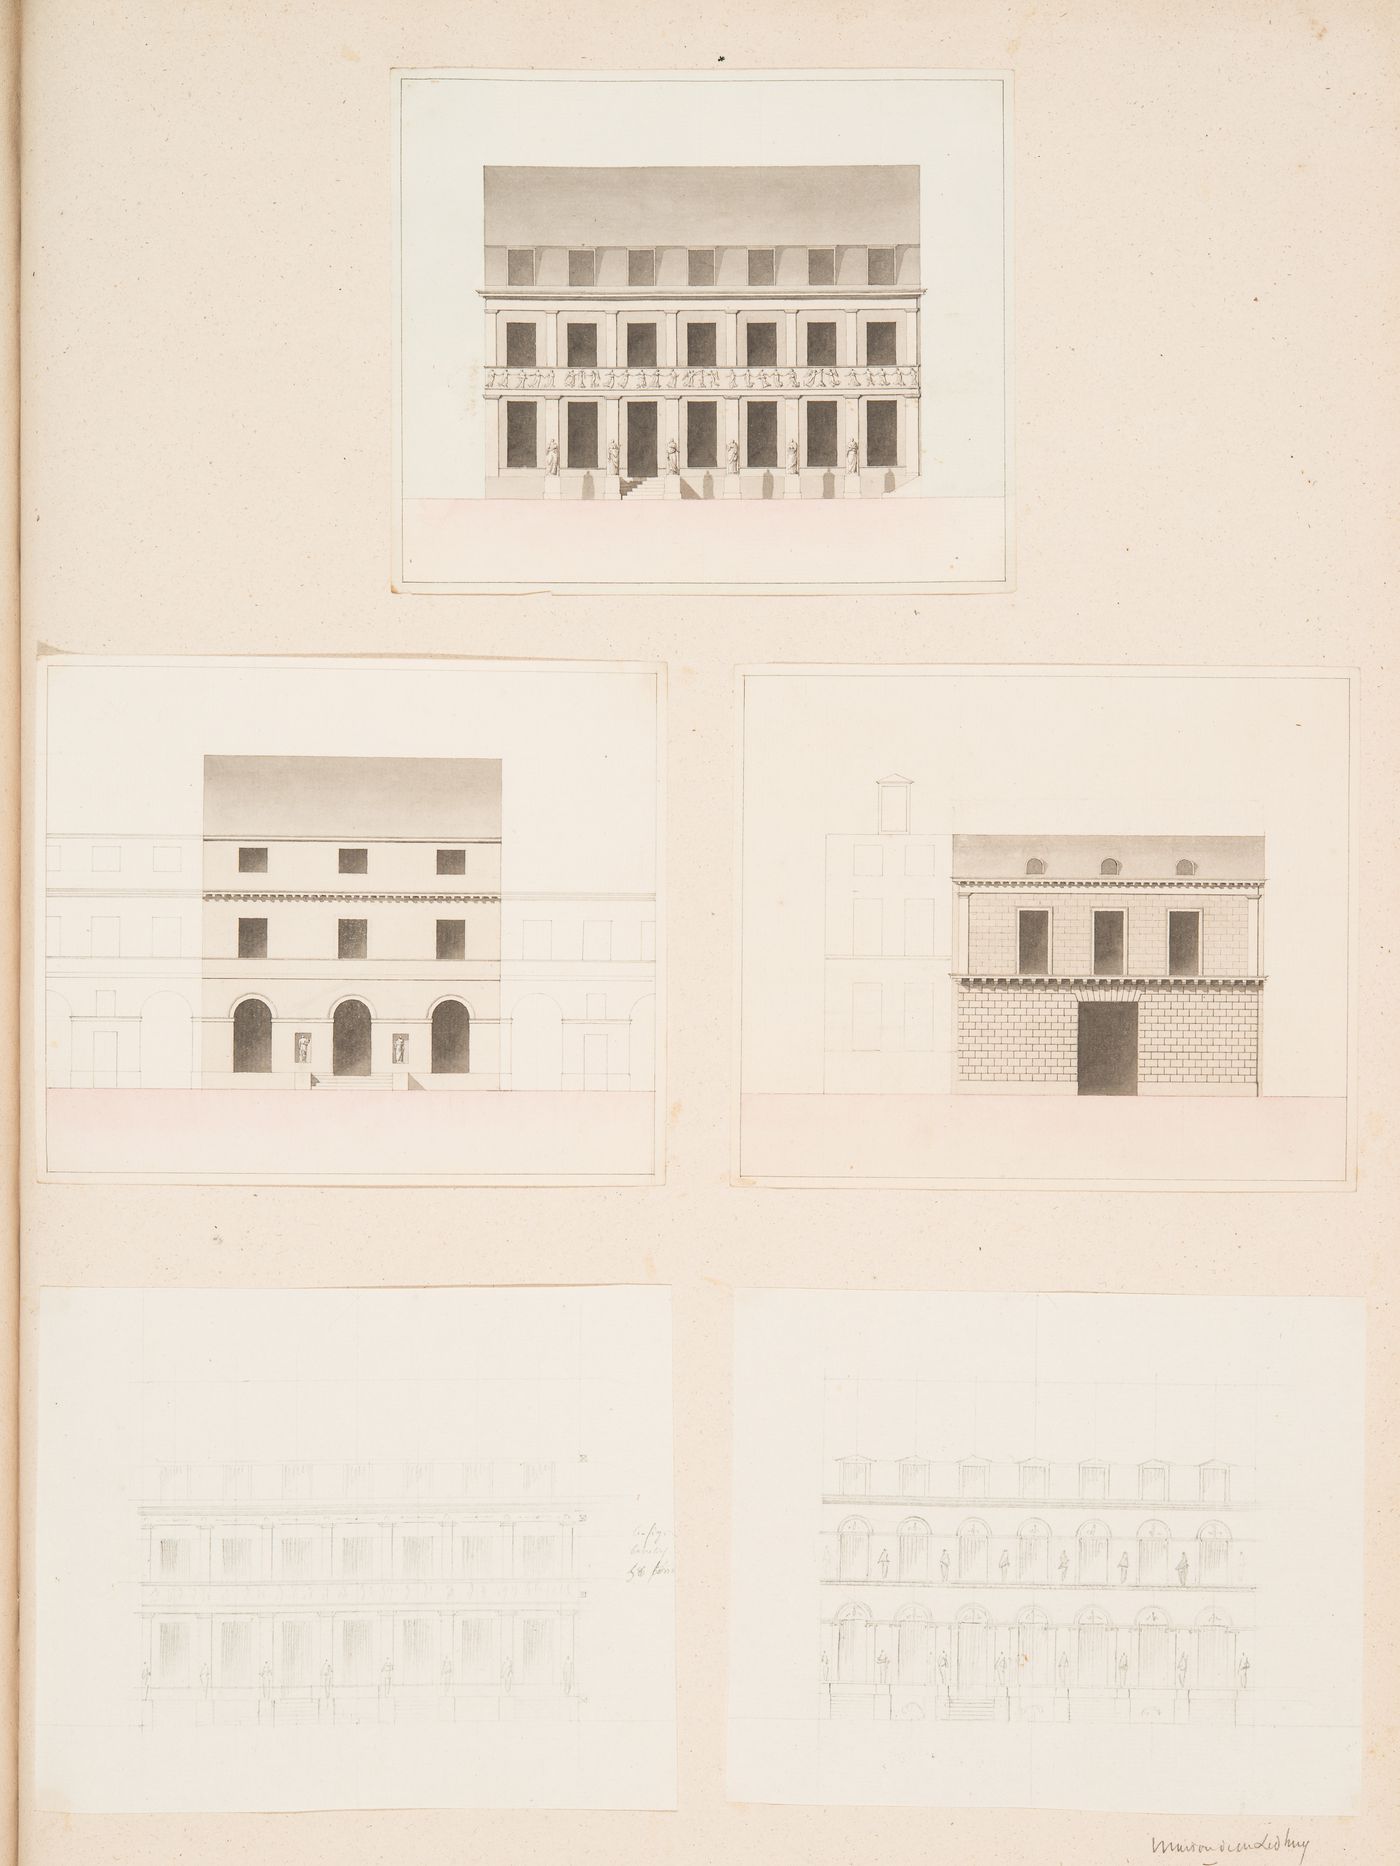 Project for renovations for a house for M. le Dhuy: Elevations, possibly alternate designs